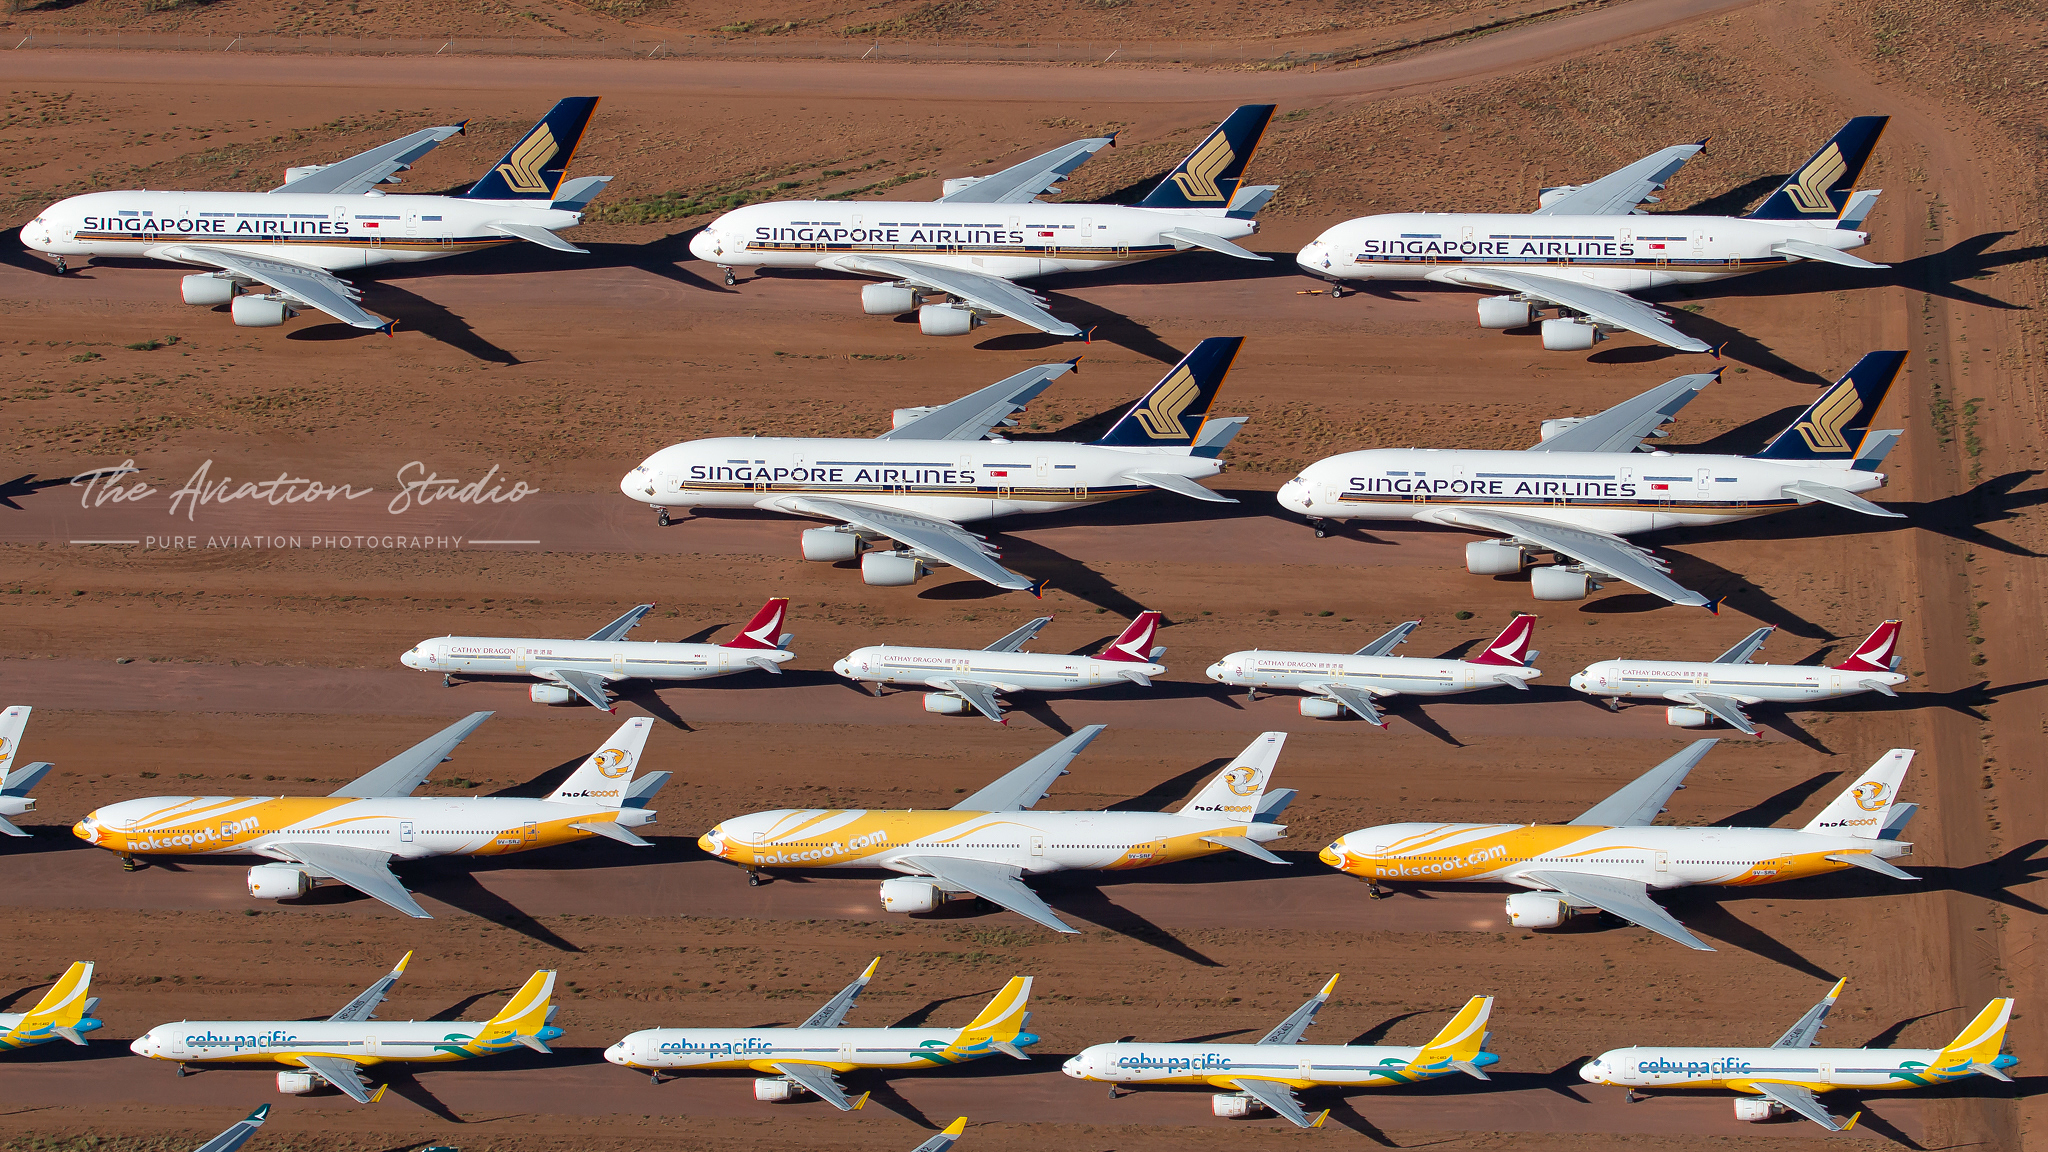 Whales in the Desert: Exploring Australia’s Aircraft Storage Facility